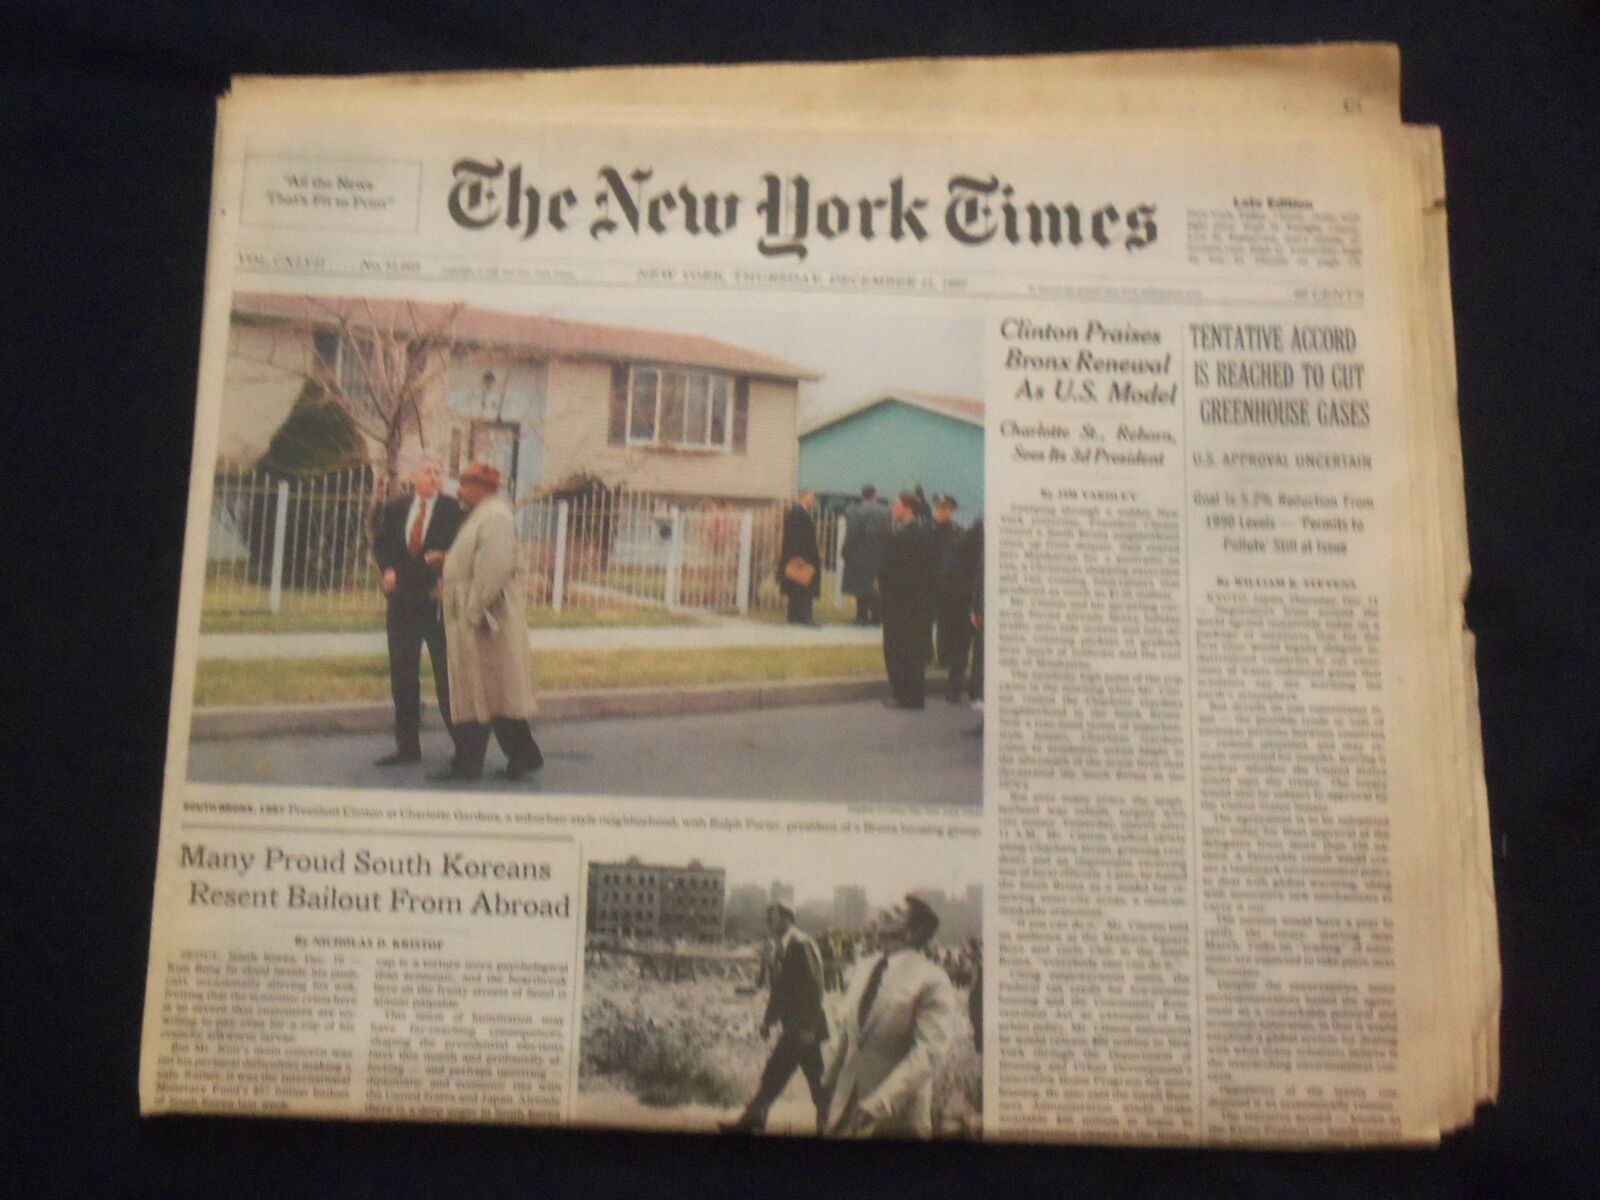 1997 DEC 11 NEW YORK TIMES NEWSPAPER -ACCORD REACHED CUT GREENHOUSE GAS- NP 7088